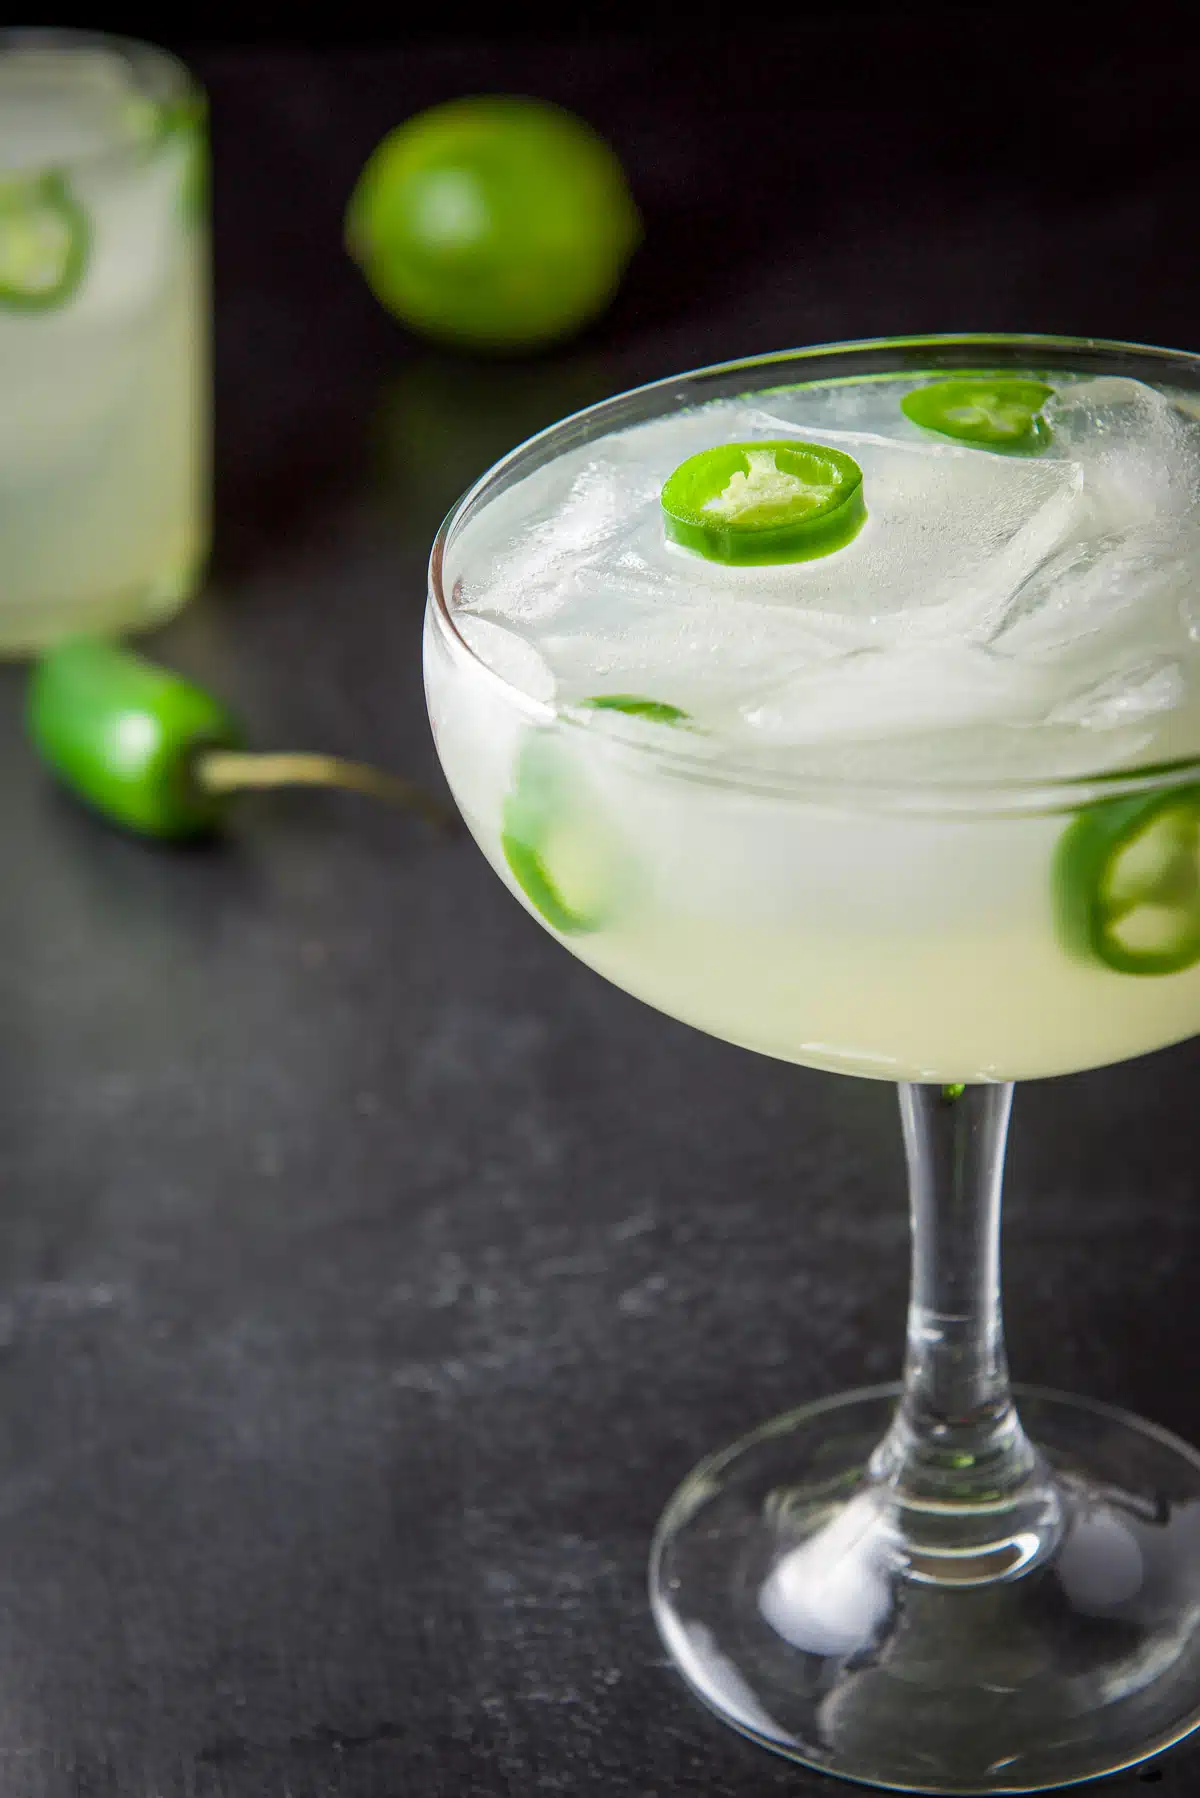 A bowl margarita glass off to the side filled with the margarita with jalapeno slices on it